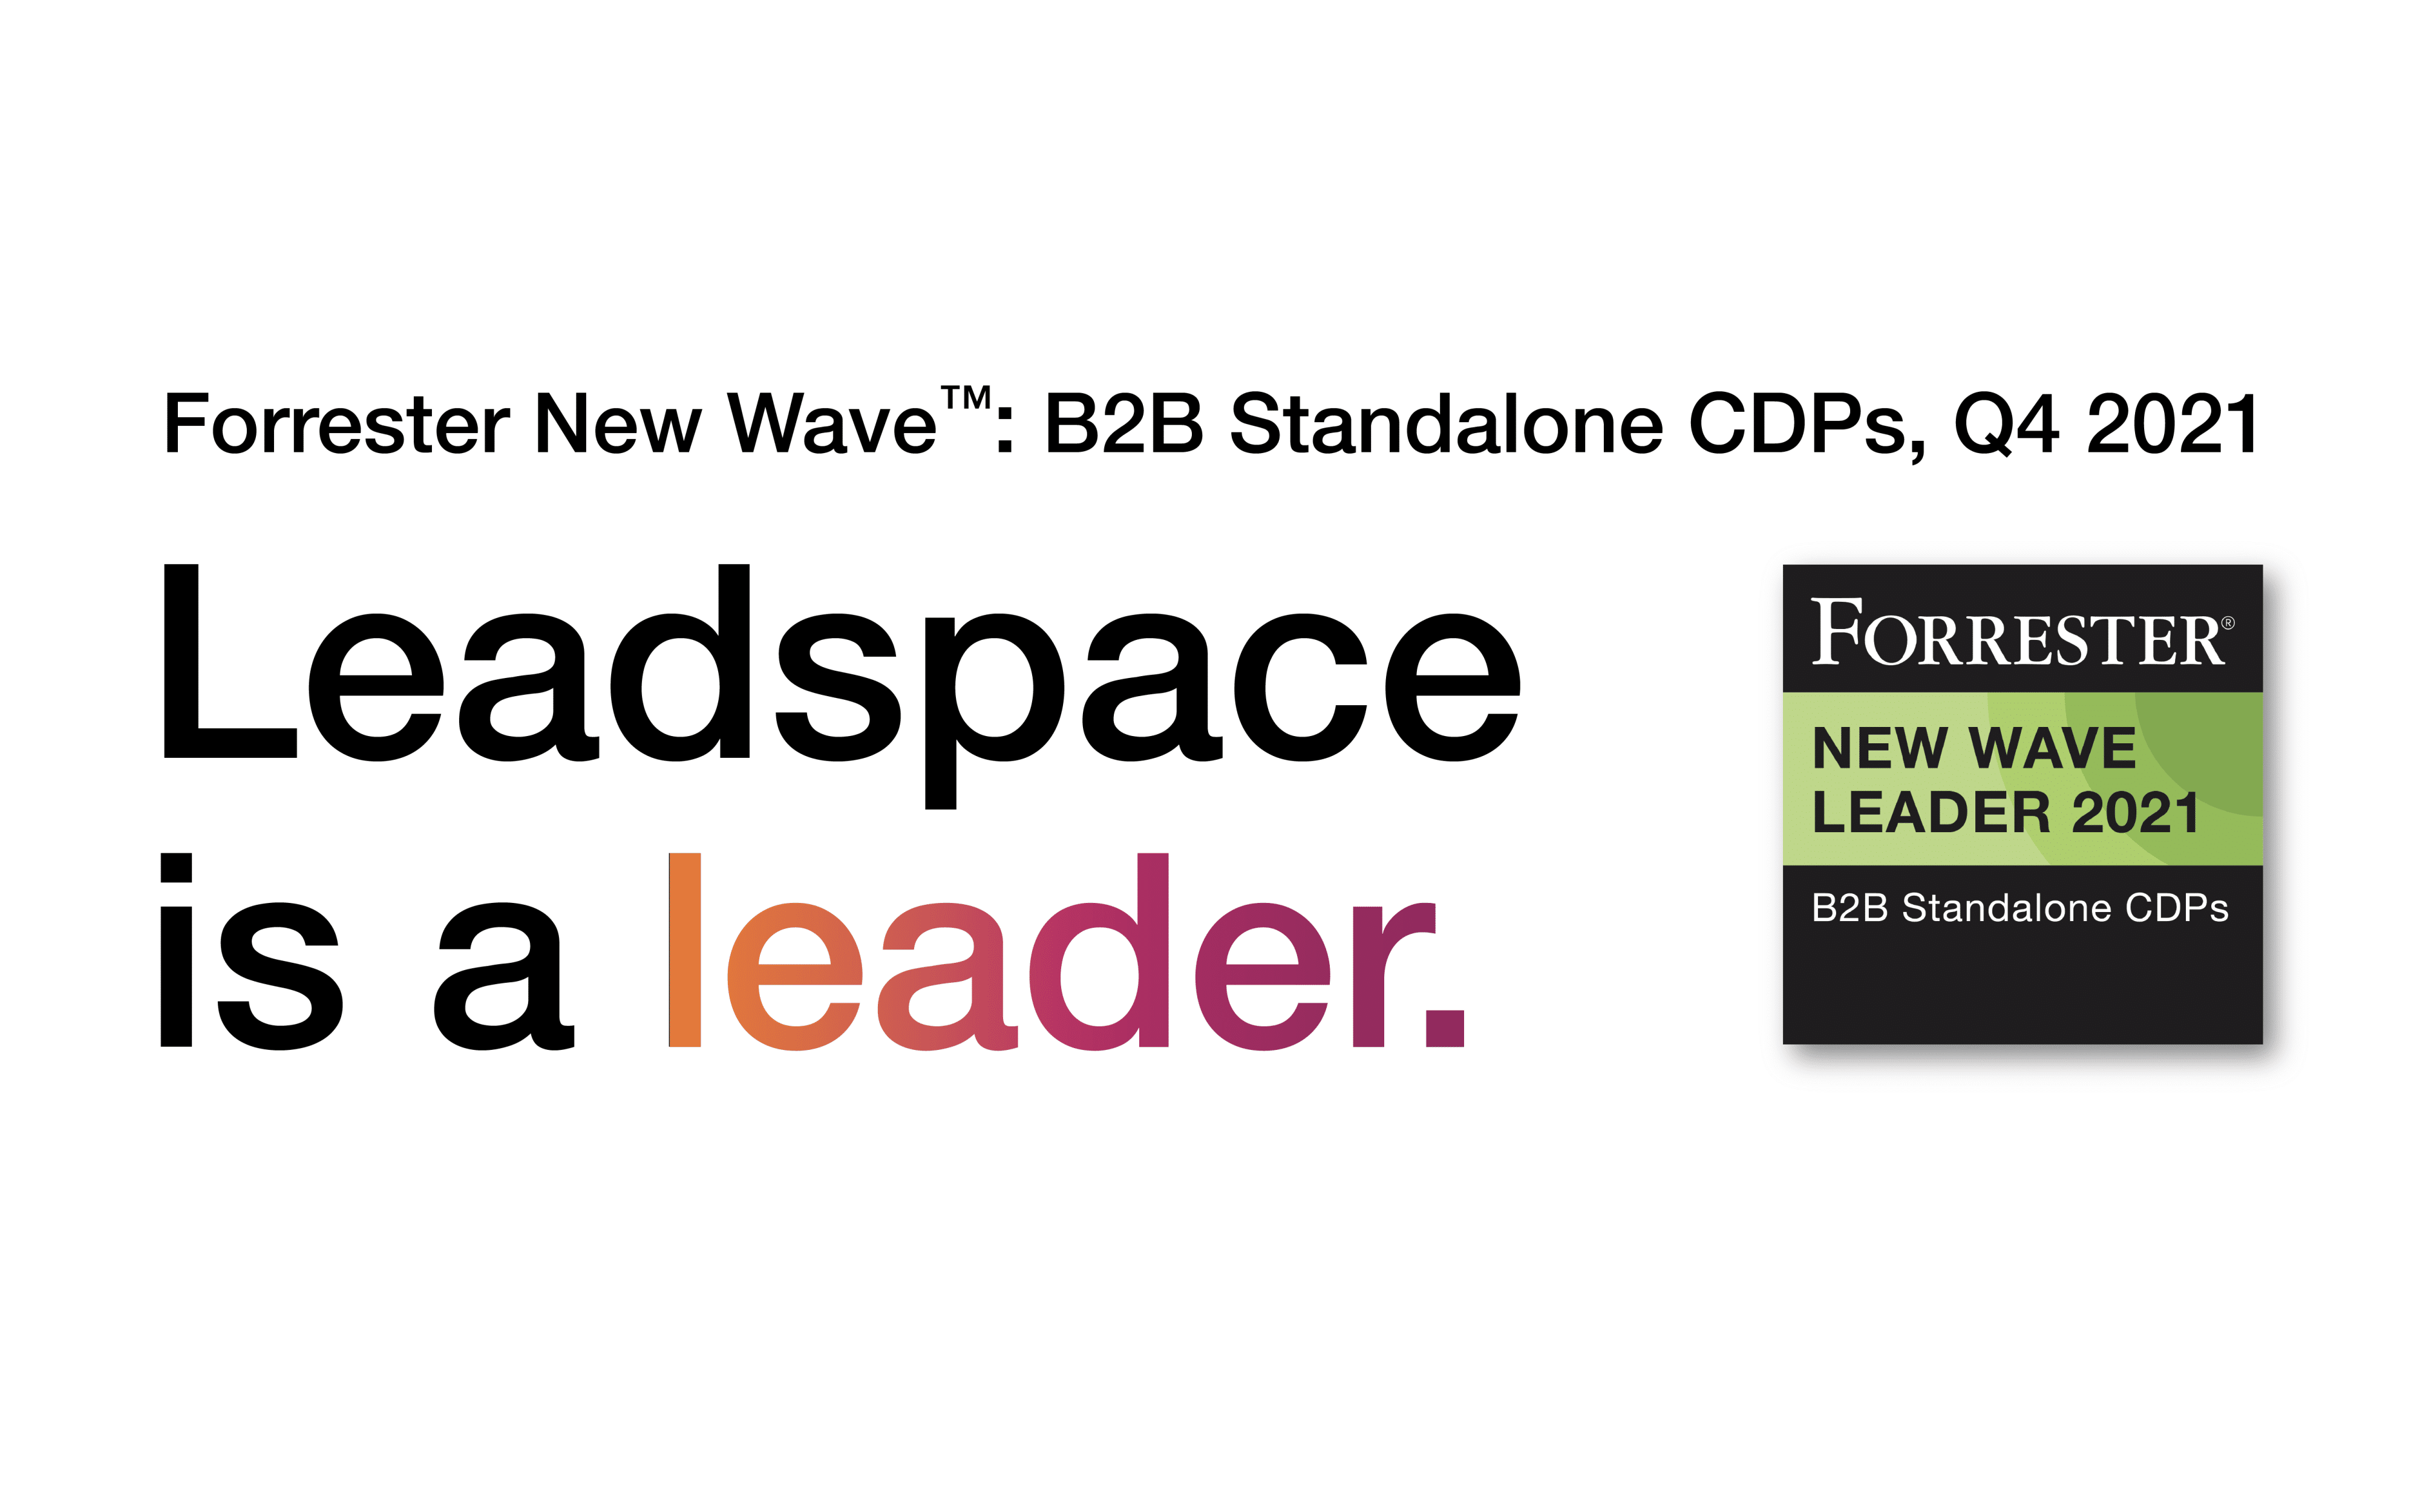 Leadspace Ranked a Leader in the Forrester New Wave: B2B Standalone Customer Data Platform Q4 2021